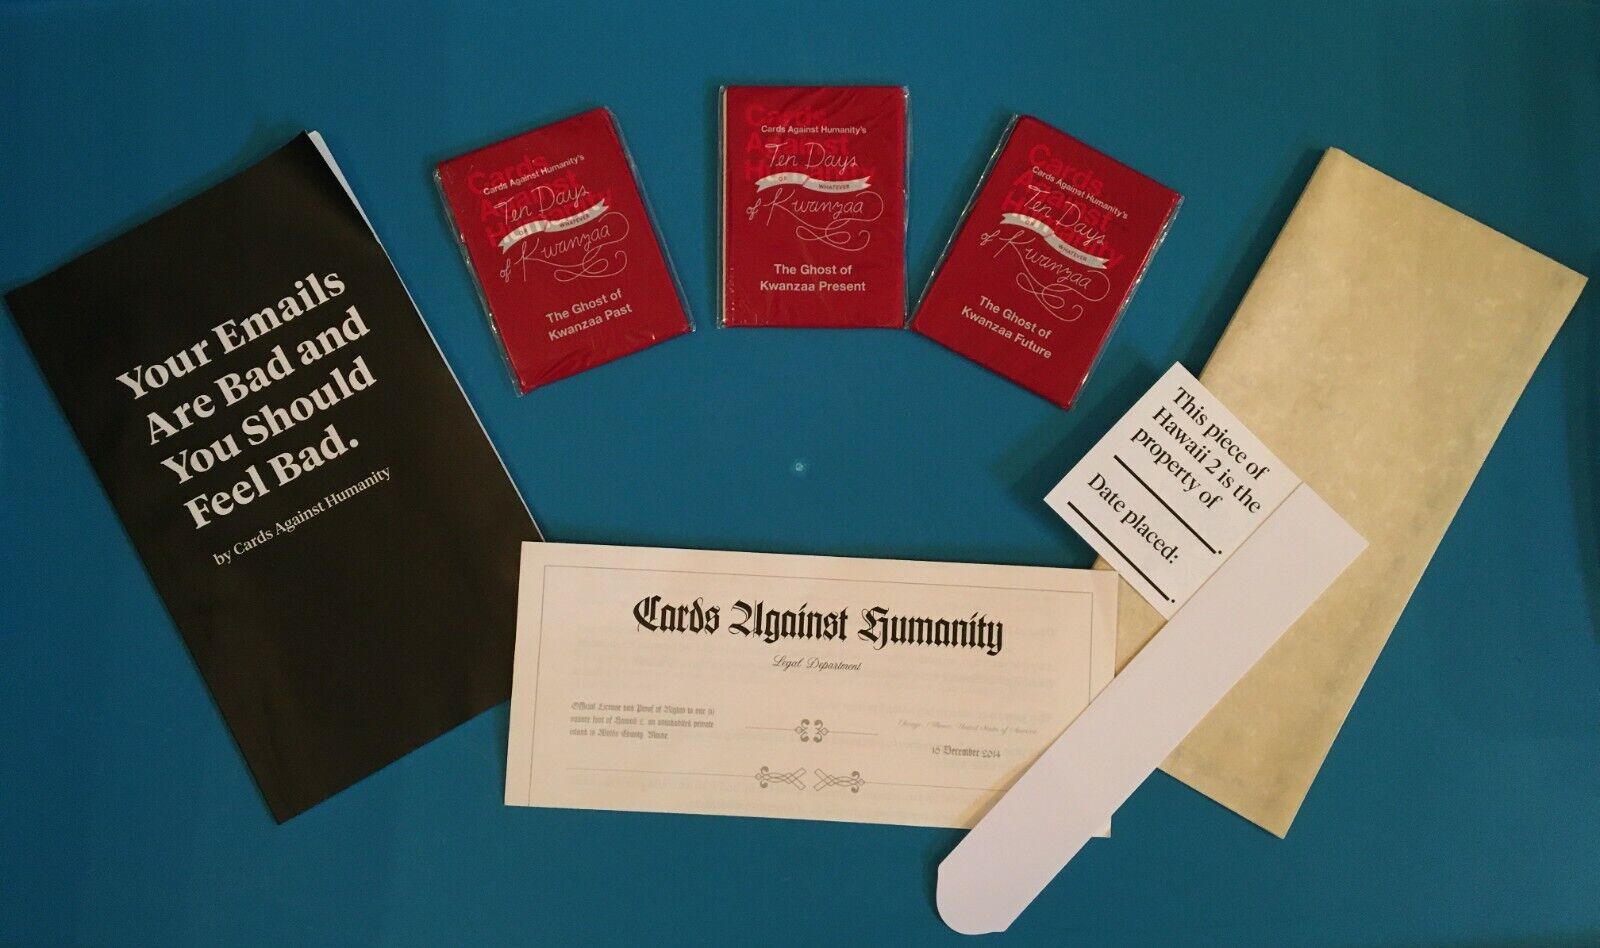 Cards Against Humanity 10 Days or Whatever of Kwanzaa - Cards, Booklet, Hawaii 2